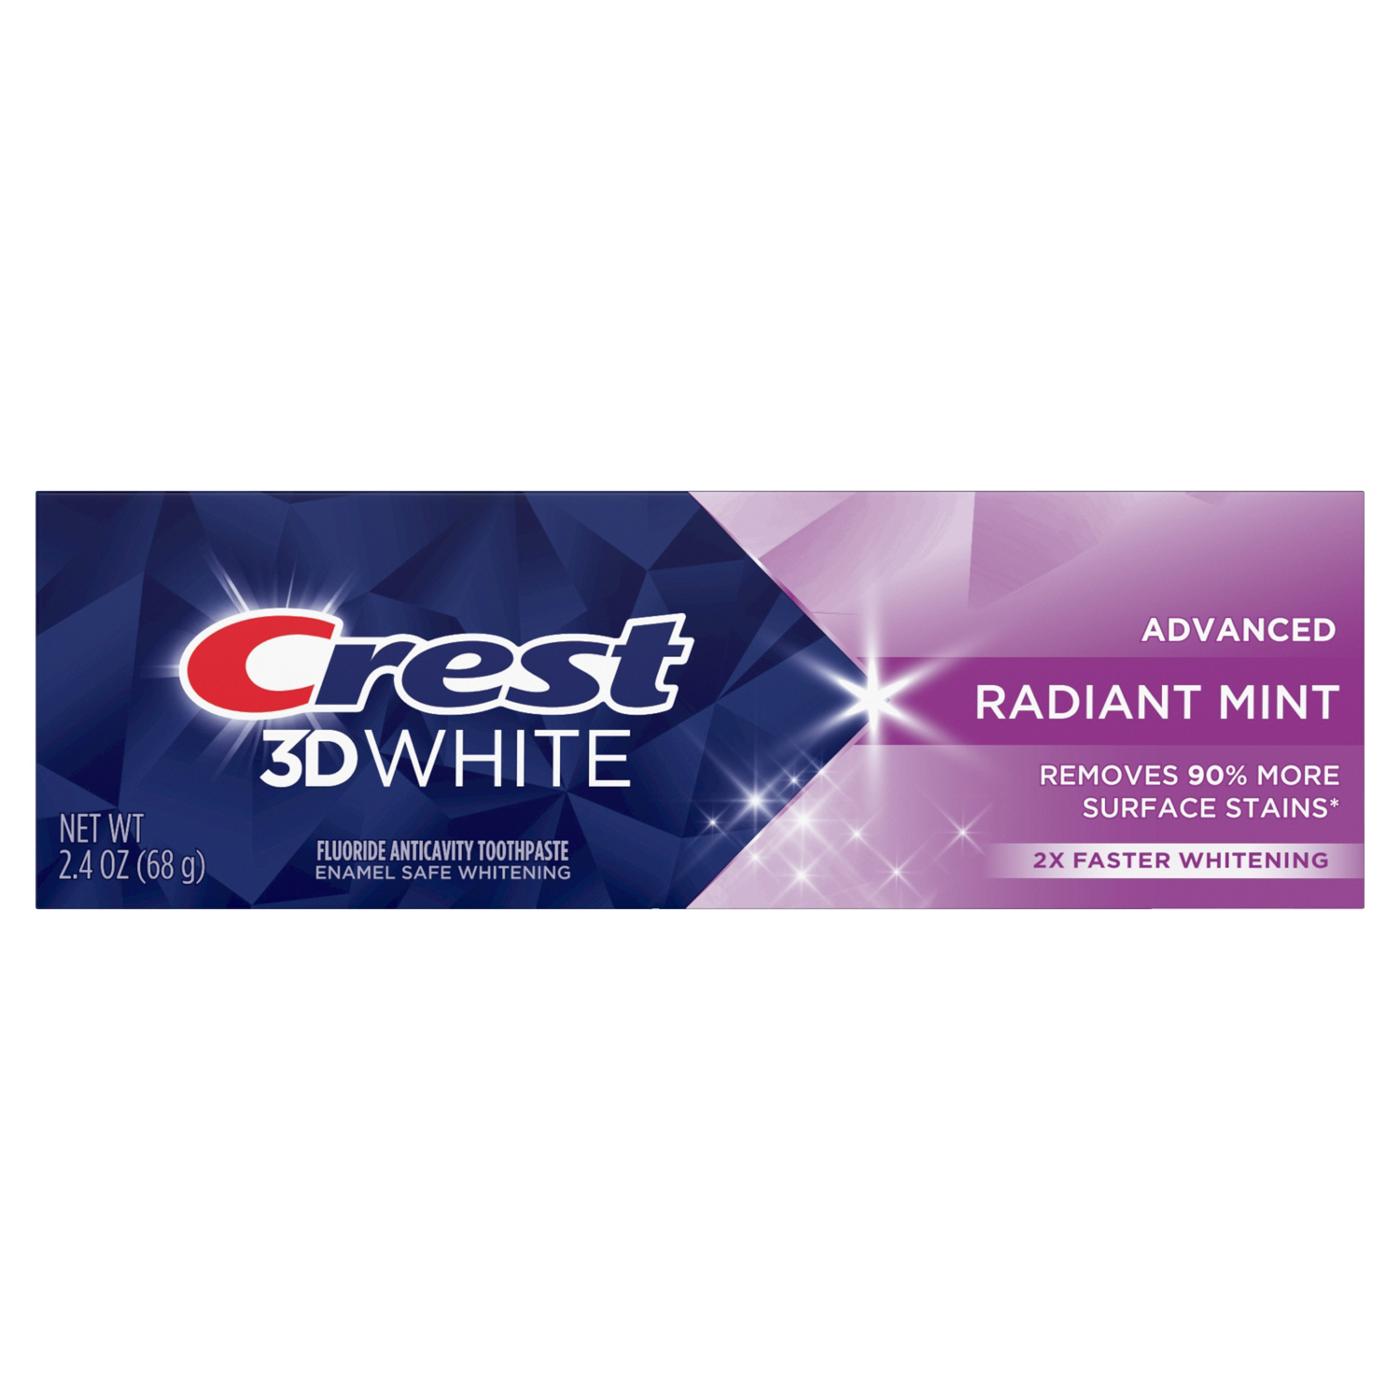 Crest 3D White Whitening Toothpaste - Radiant Mint; image 1 of 8